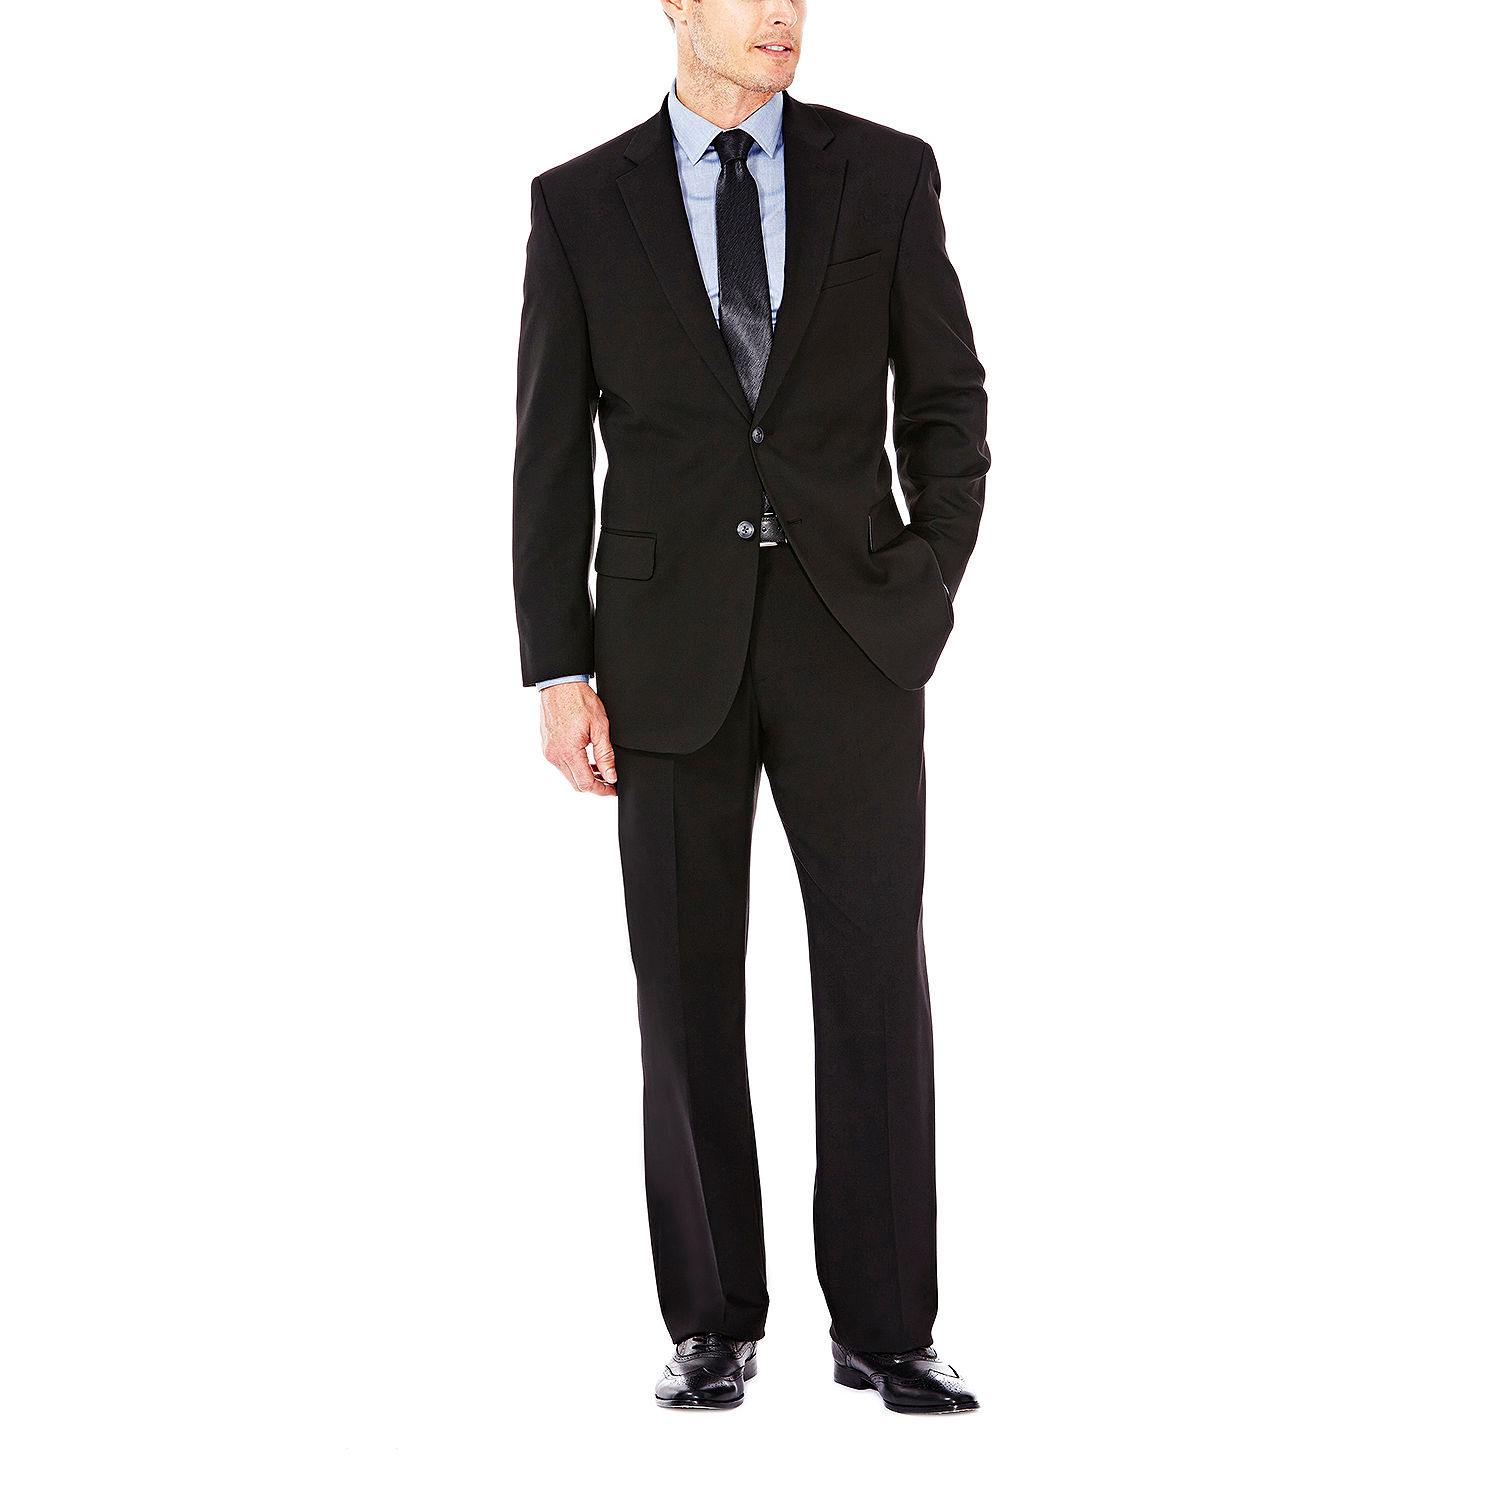 J.M. Haggar Premium Stretch Sharkskin Classic Fit Suit Separates - JCPenney